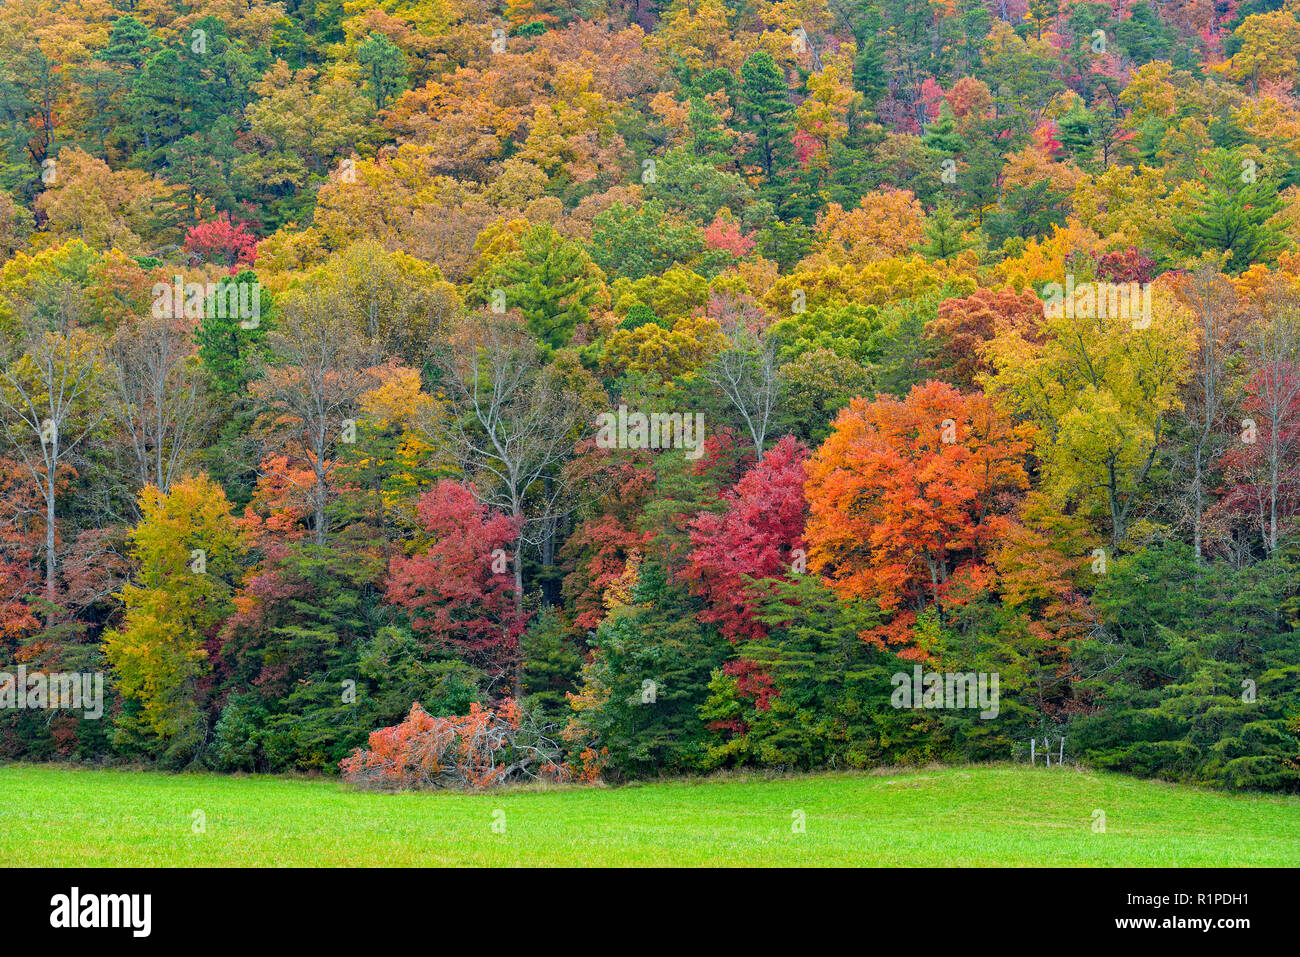 Autumn colour in Cades Cove, Great Smoky Mountains National Park, Tennessee, USA Stock Photo